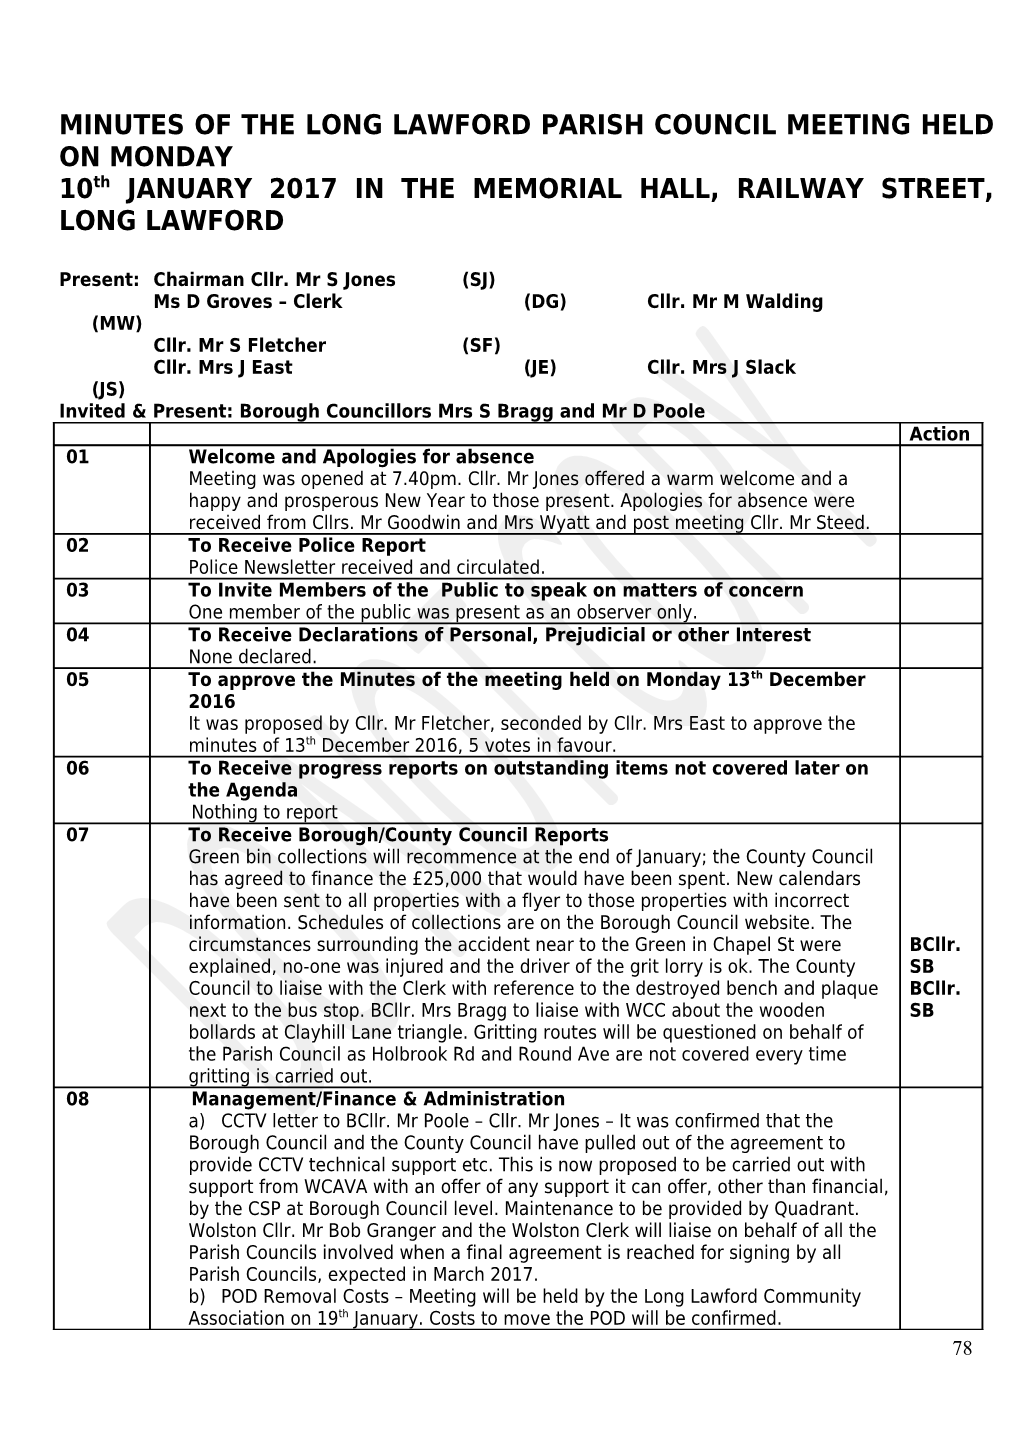 Minutes of the Long Lawford Parish Council Meeting Held on Tuesday 8Th May 2007 in The